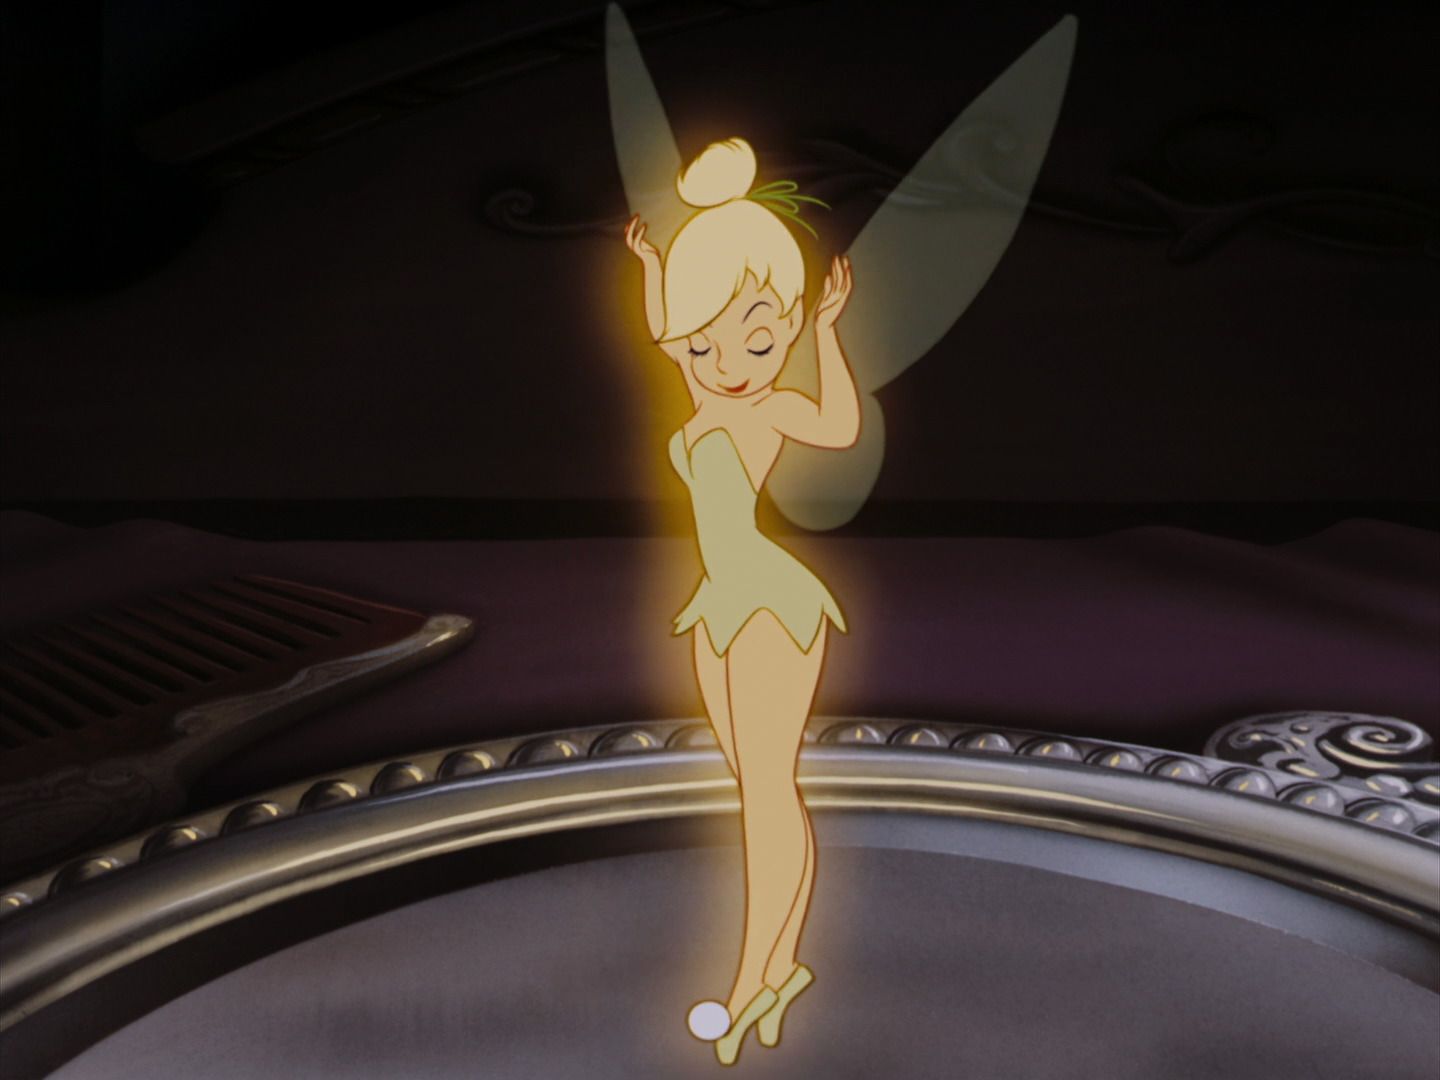 Tinkerbell stands on a plate looking down with her eyes closed.